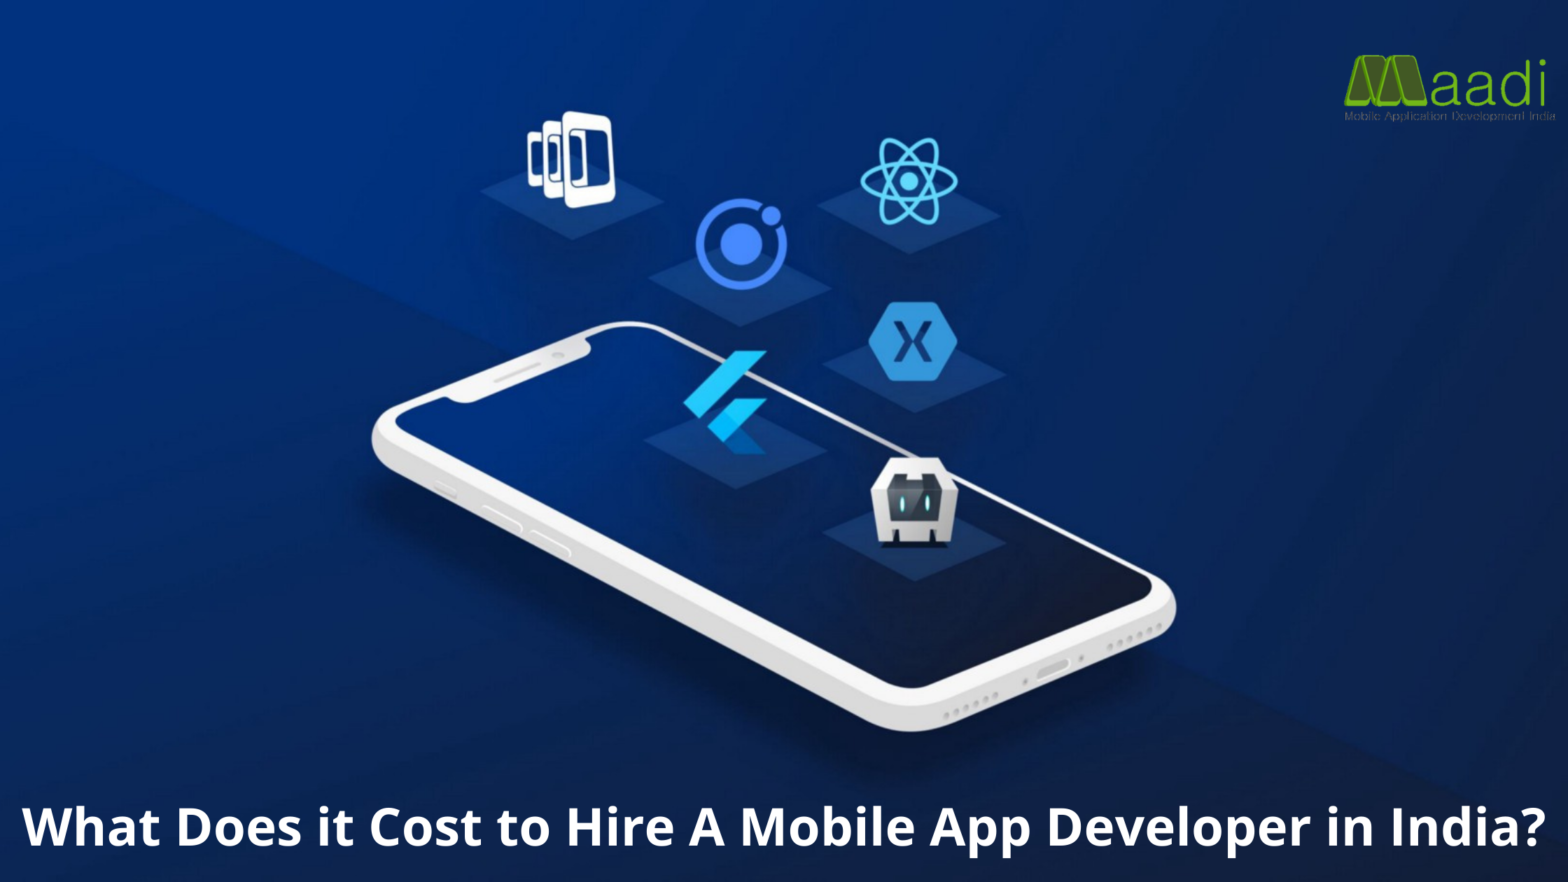 What Does it Cost to Hire A Mobile App Developer in India?